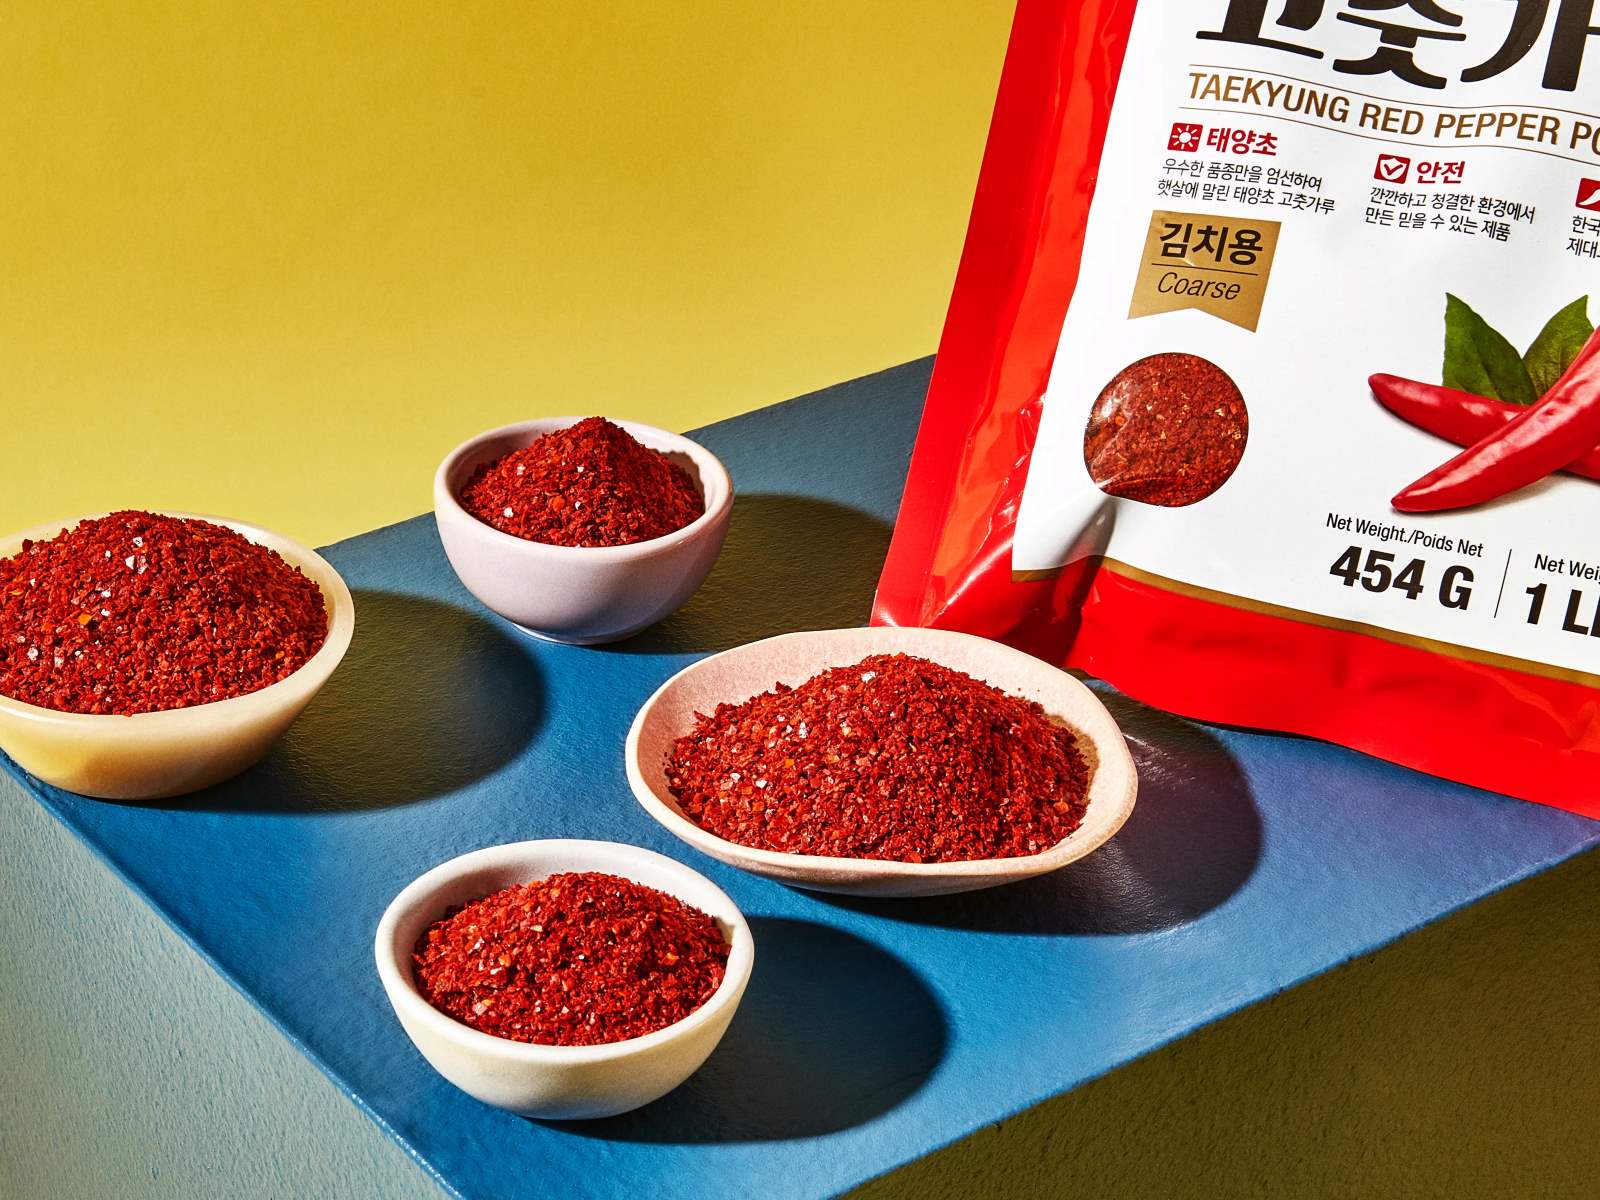 Discover The Perfect Mild Korean Red Pepper Flakes For Spicy Food Lovers!